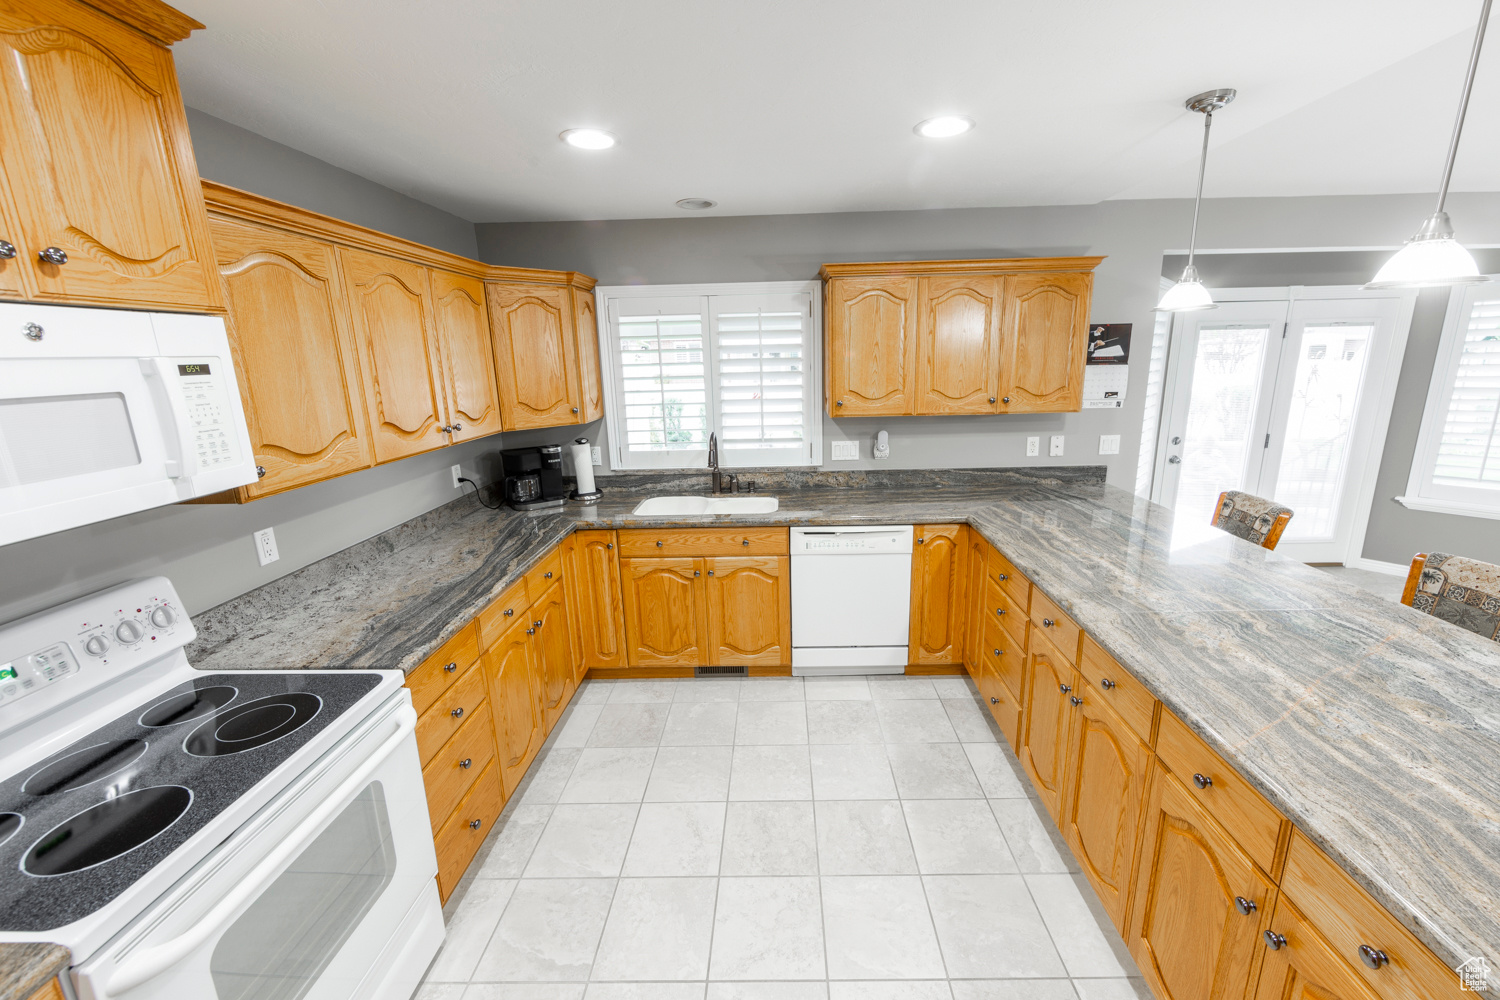 Kitchen with white appliances, pendant lighting, sink, granite counters, and light tile floors